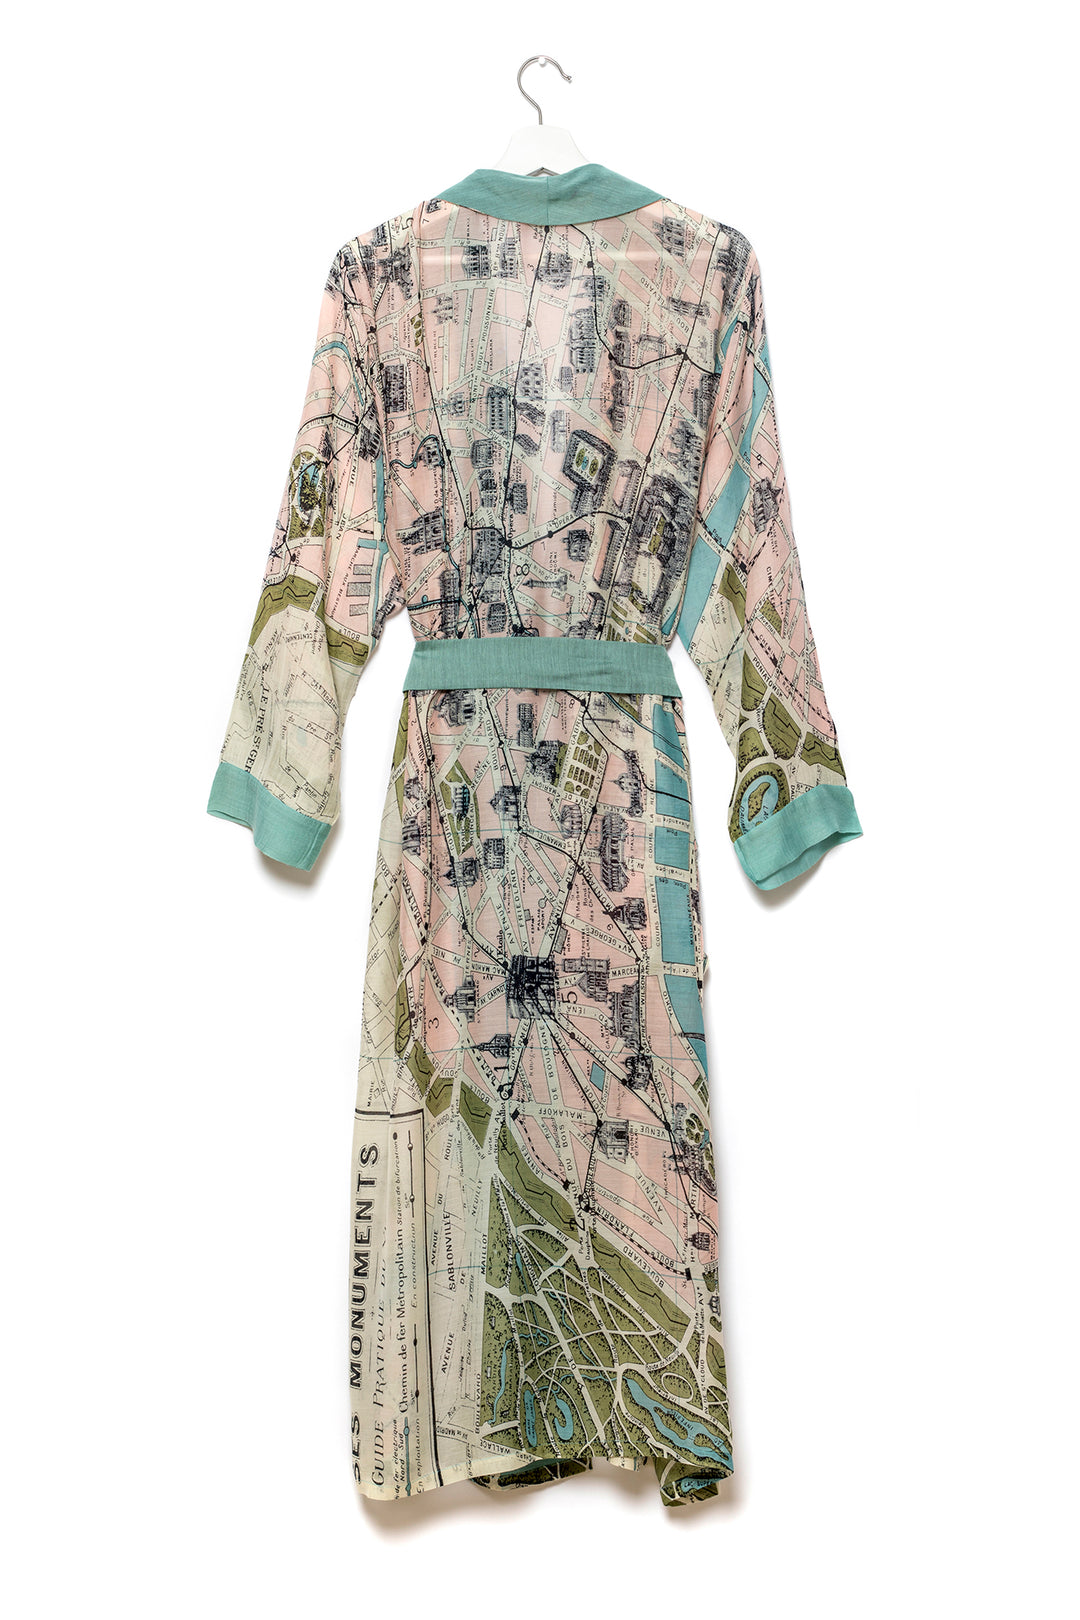 Paris Map Gown - One Hundred Stars